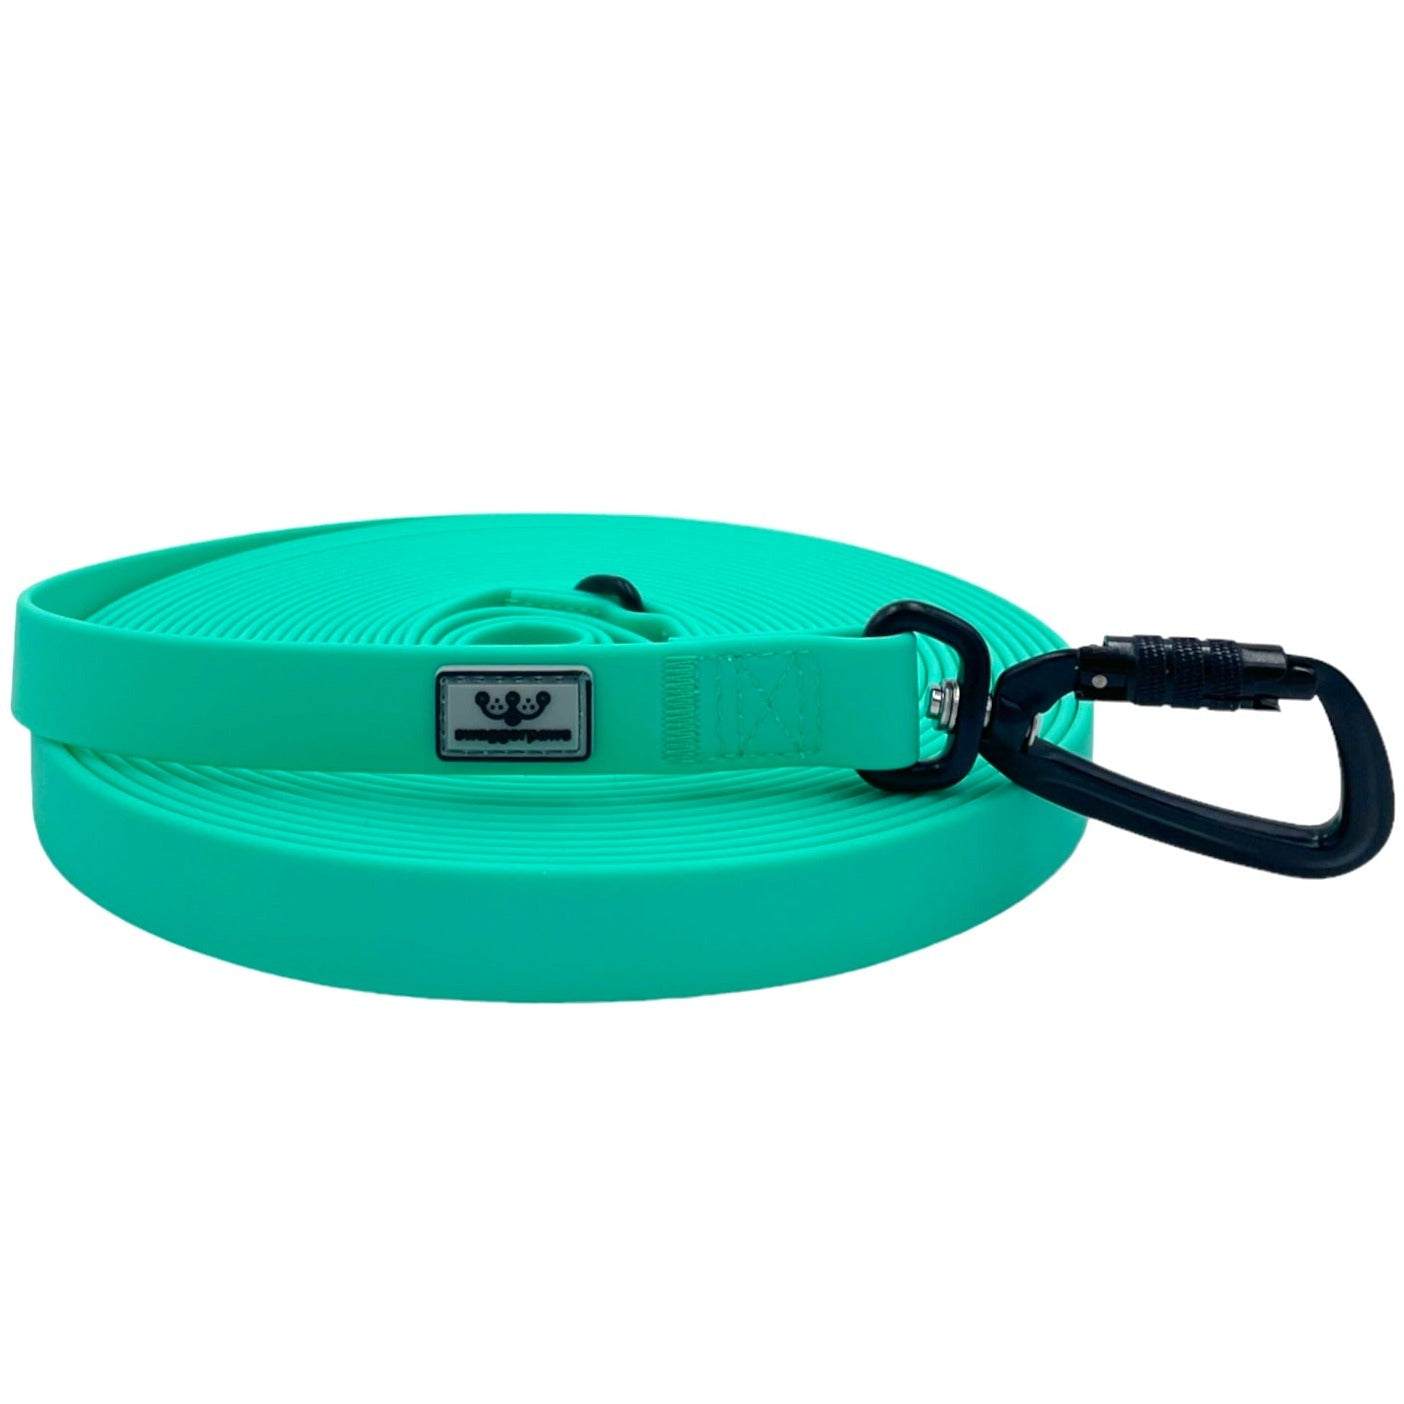 SwaggerPaws waterproof long line dog lead with auto-lock carabiner, spearmint green.